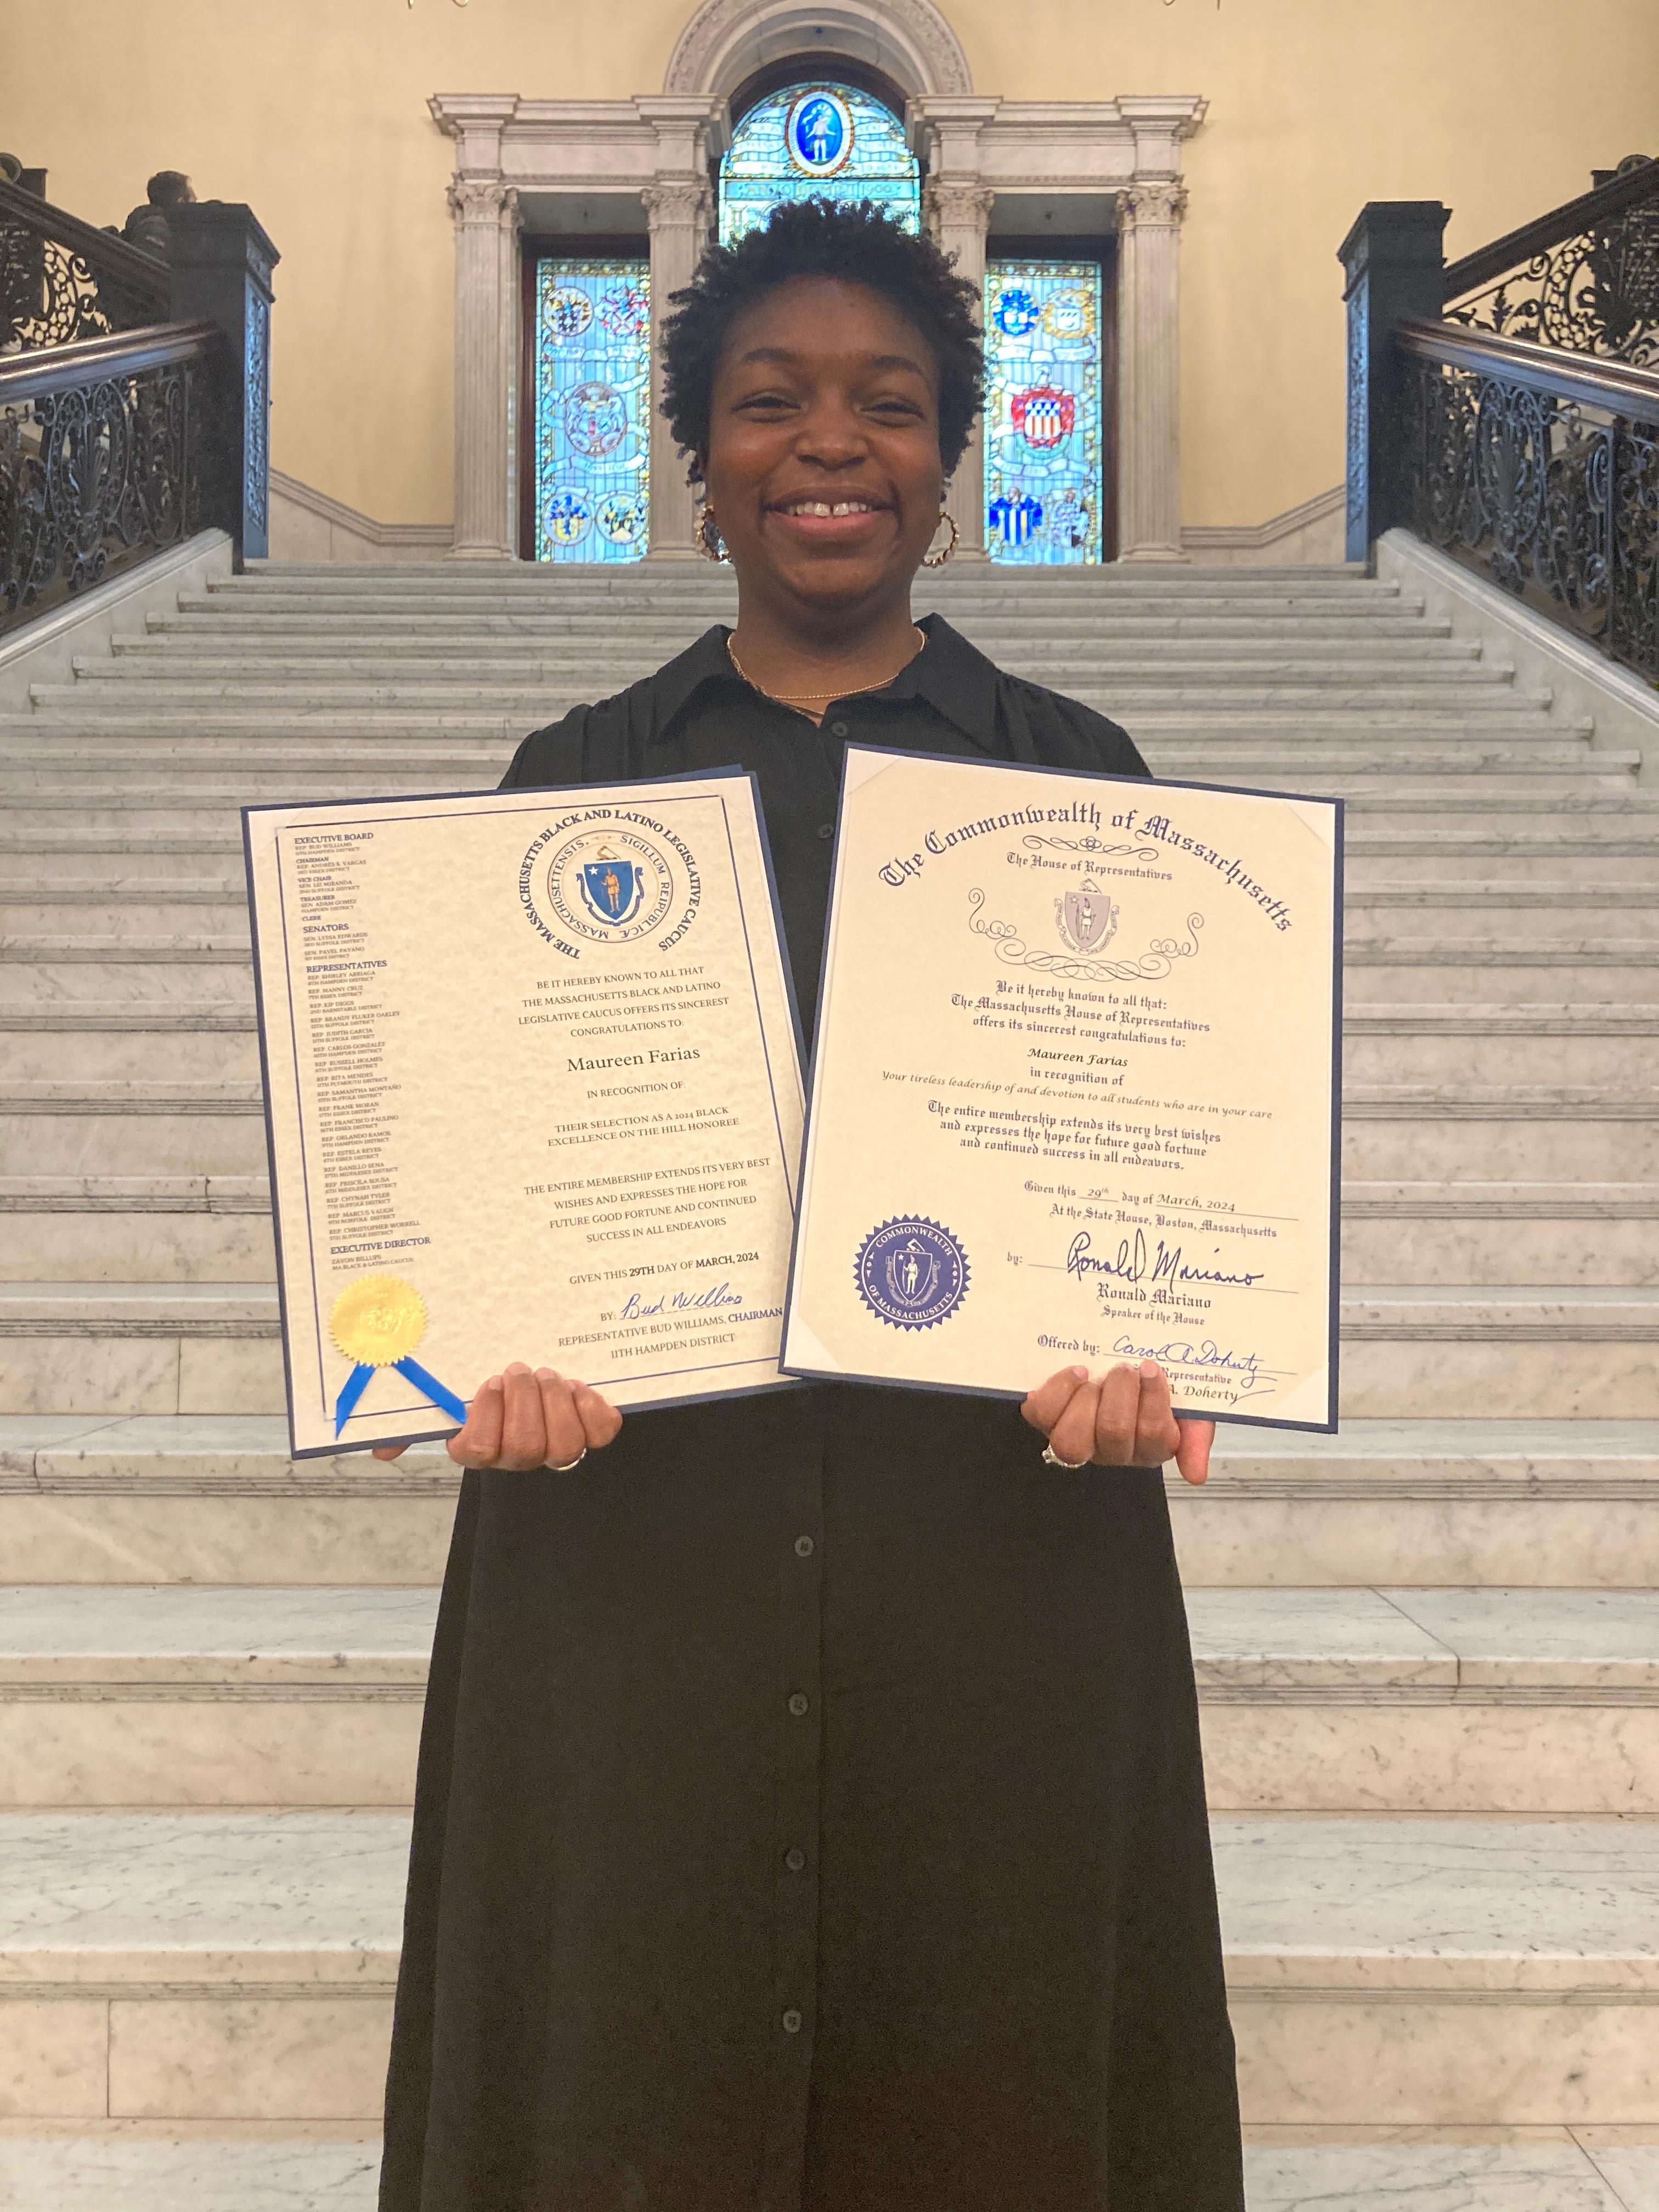 Maureen Farias holding up her citations and recognition in front of steps at the State House